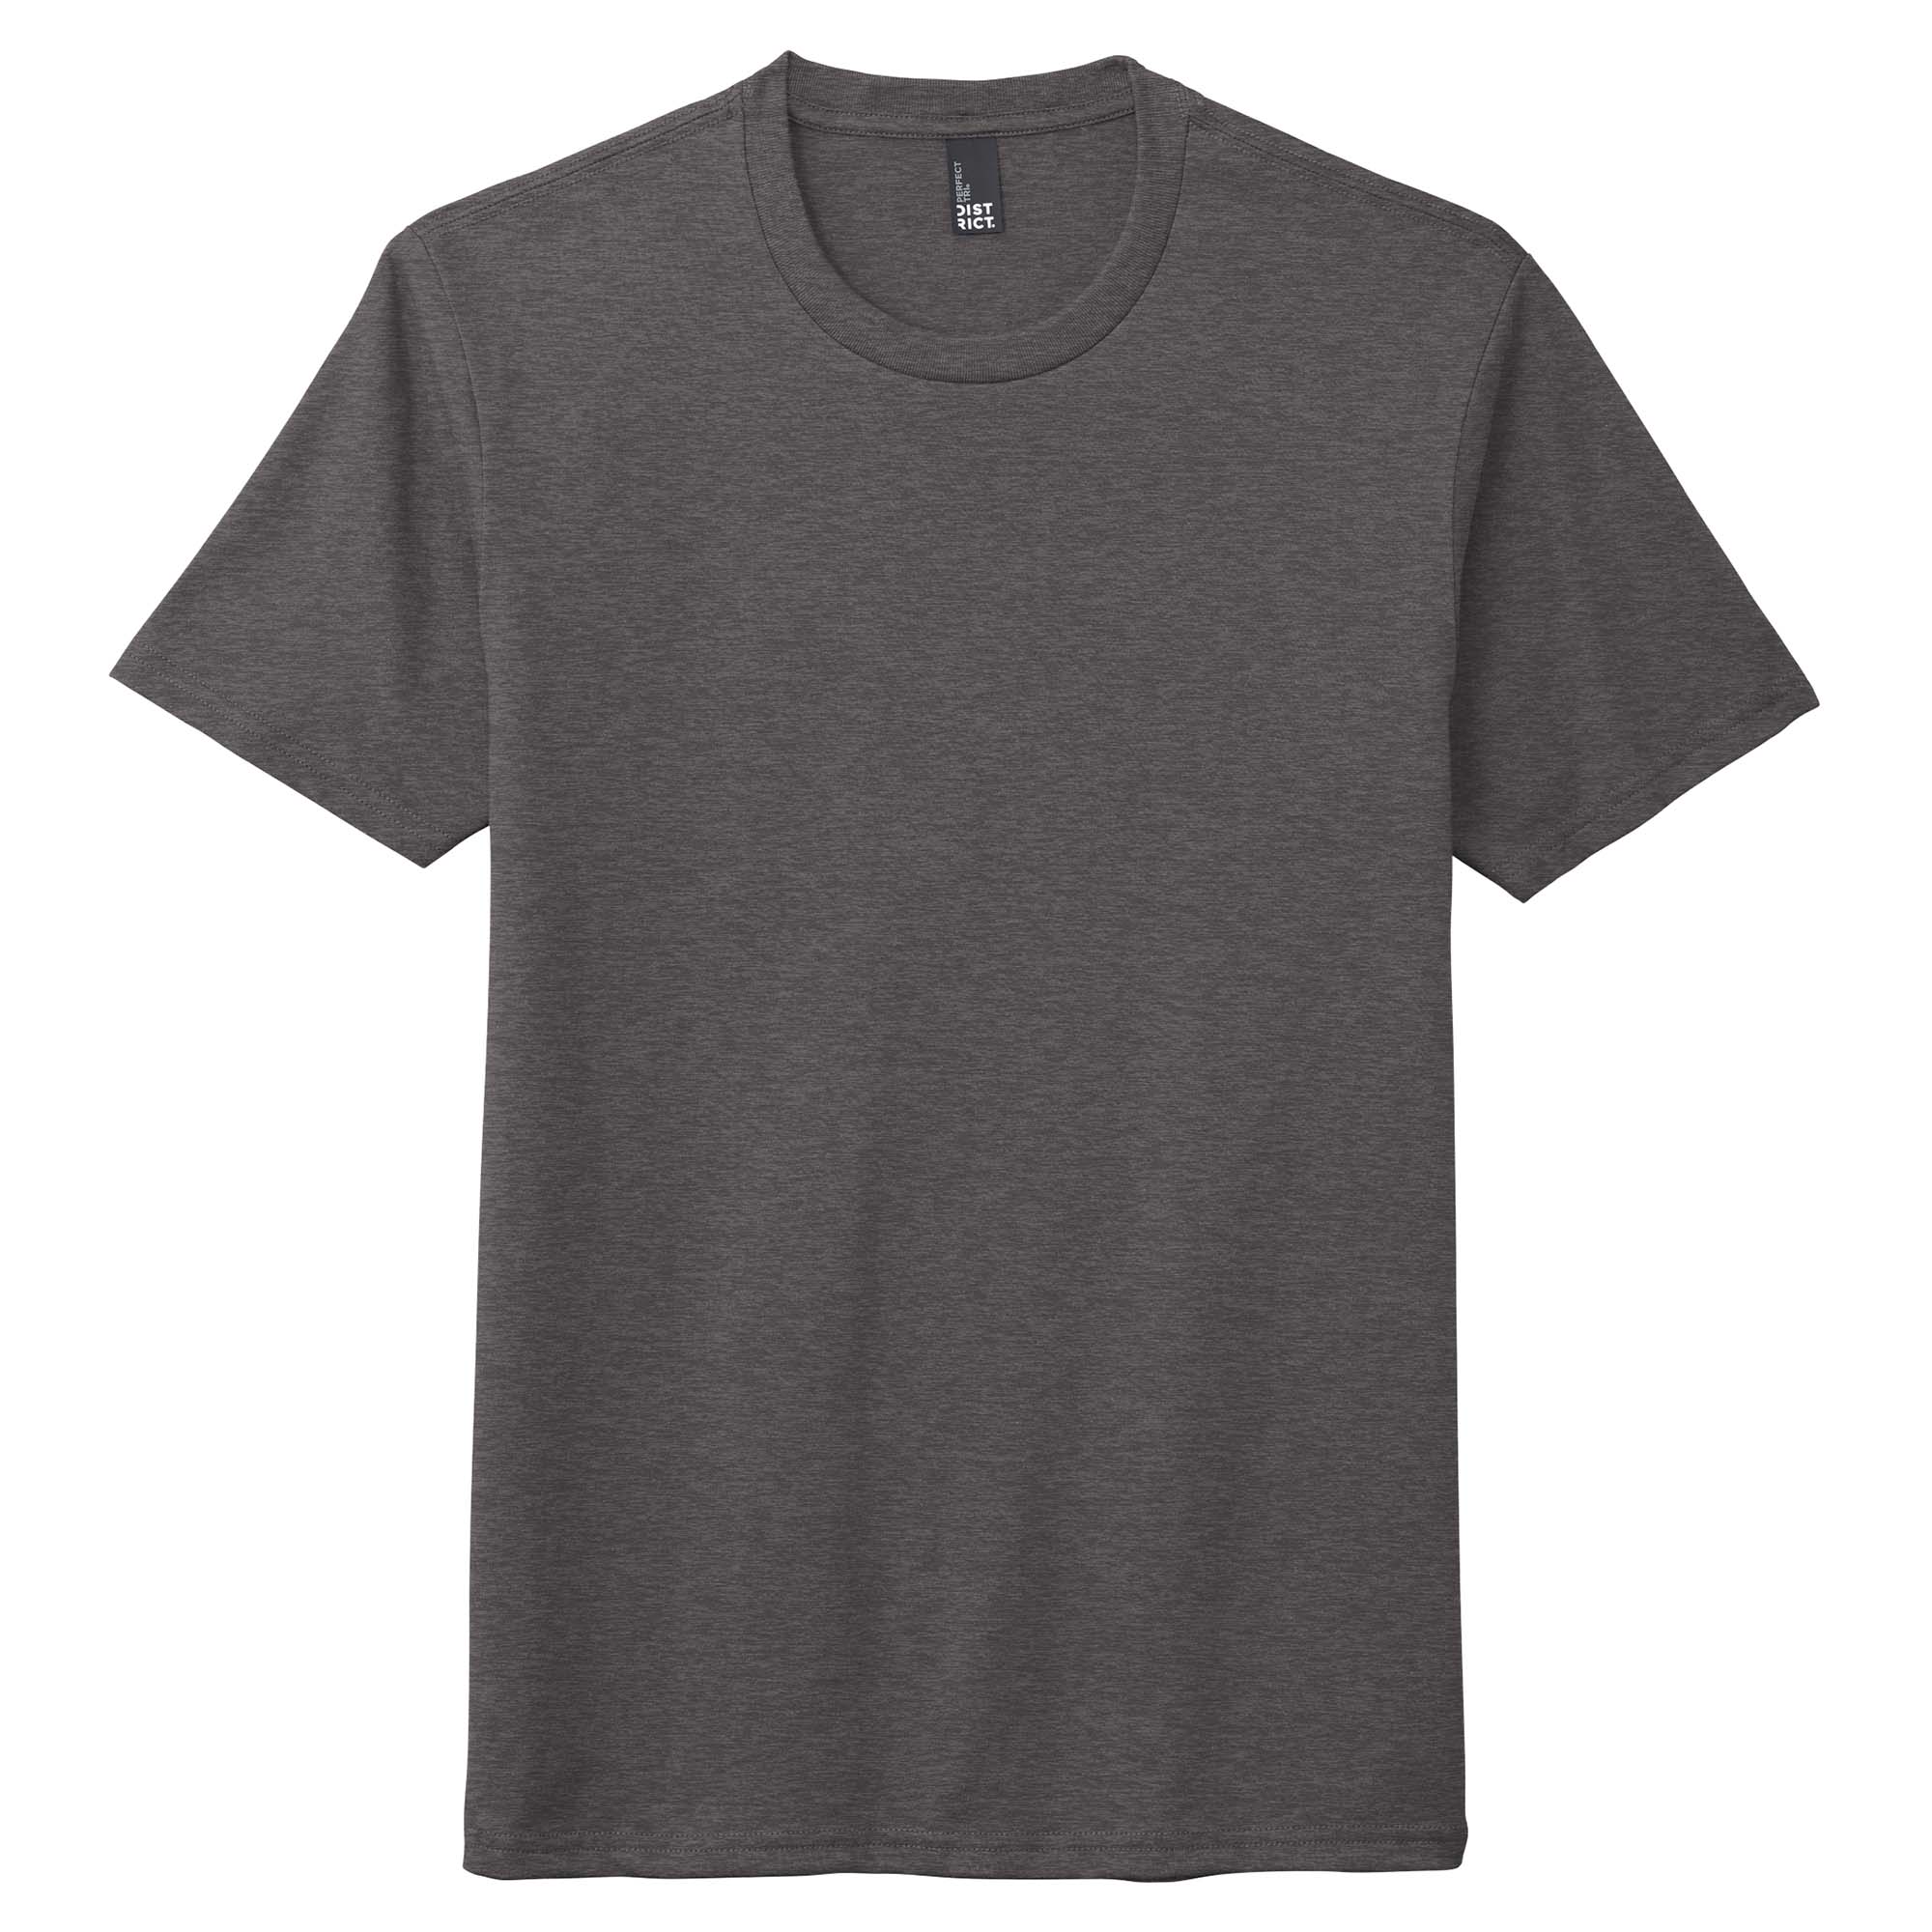 District DM130 Perfect Tri Crew Tee - Heathered Charcoal | Full Source